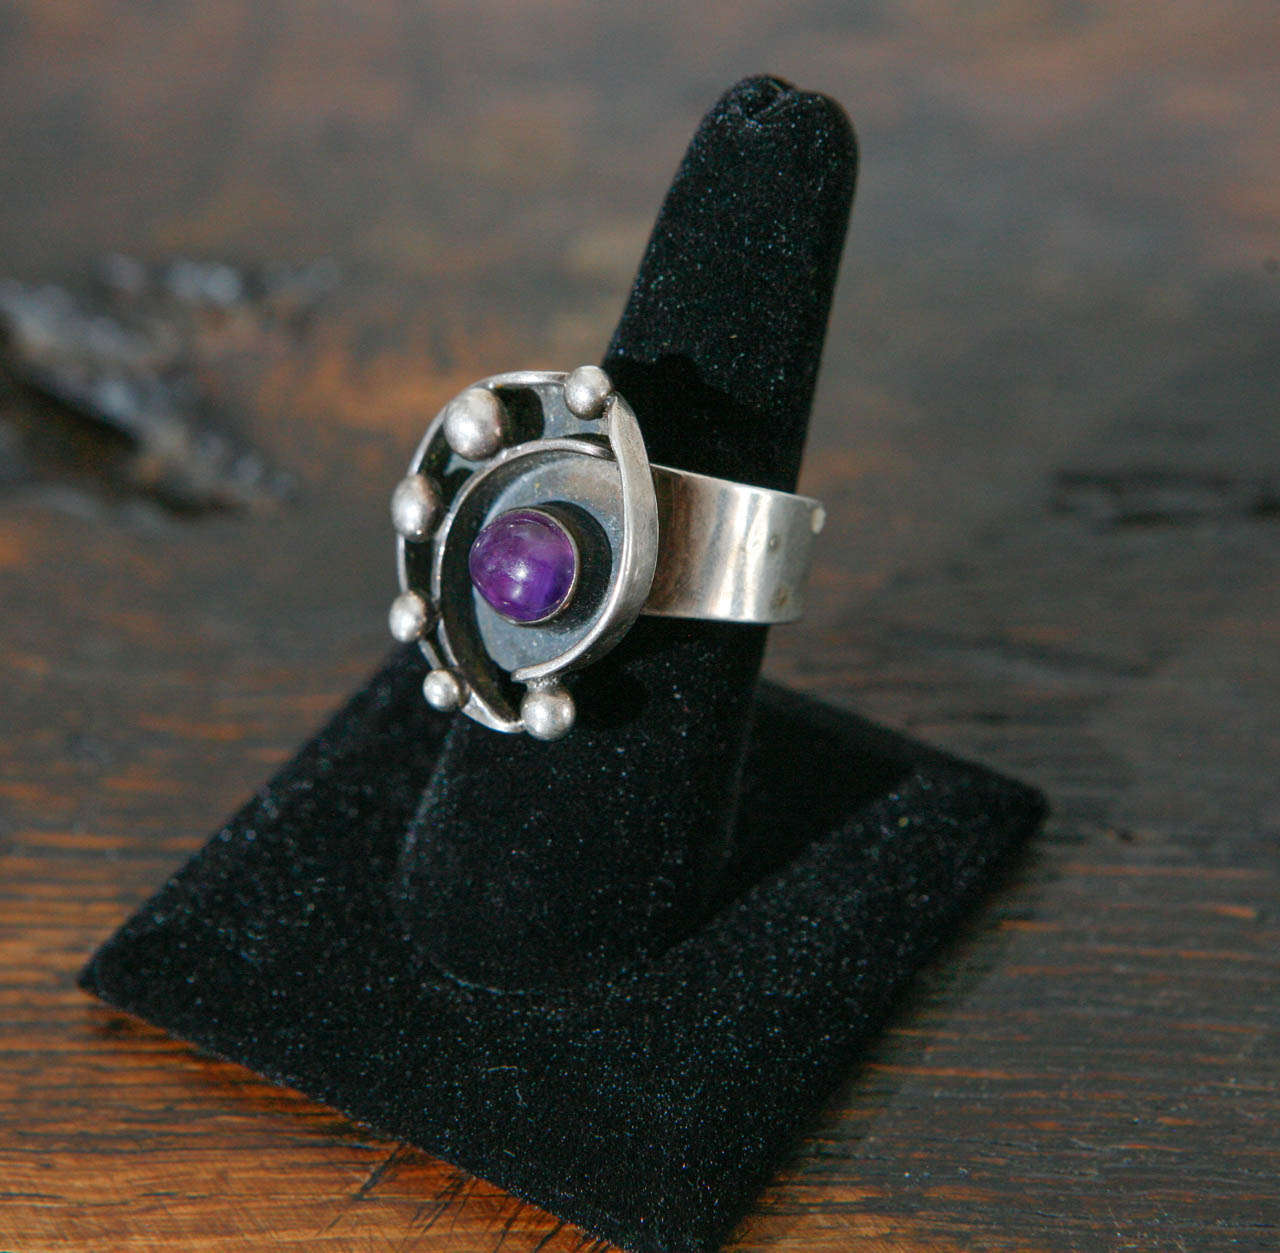 Artist made sterling silver eye ring with amythest surrounded by silver rounds